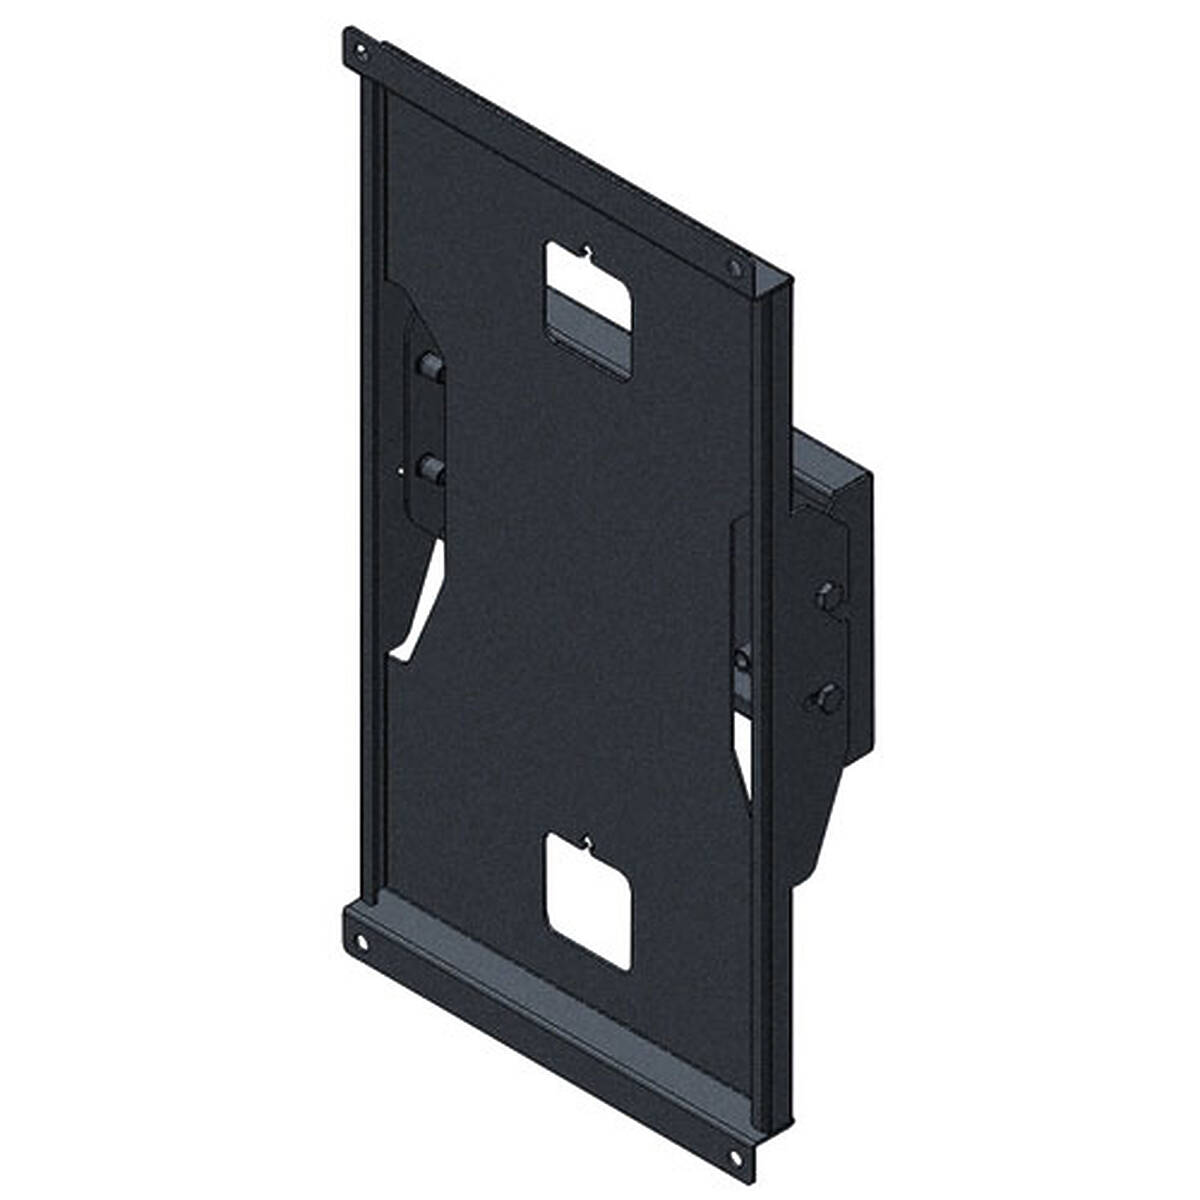 Unicol PPW3 Xactmatch Portrait bespoke tilting wall mount for screens from 71 to 90 inches product image. Click to enlarge.